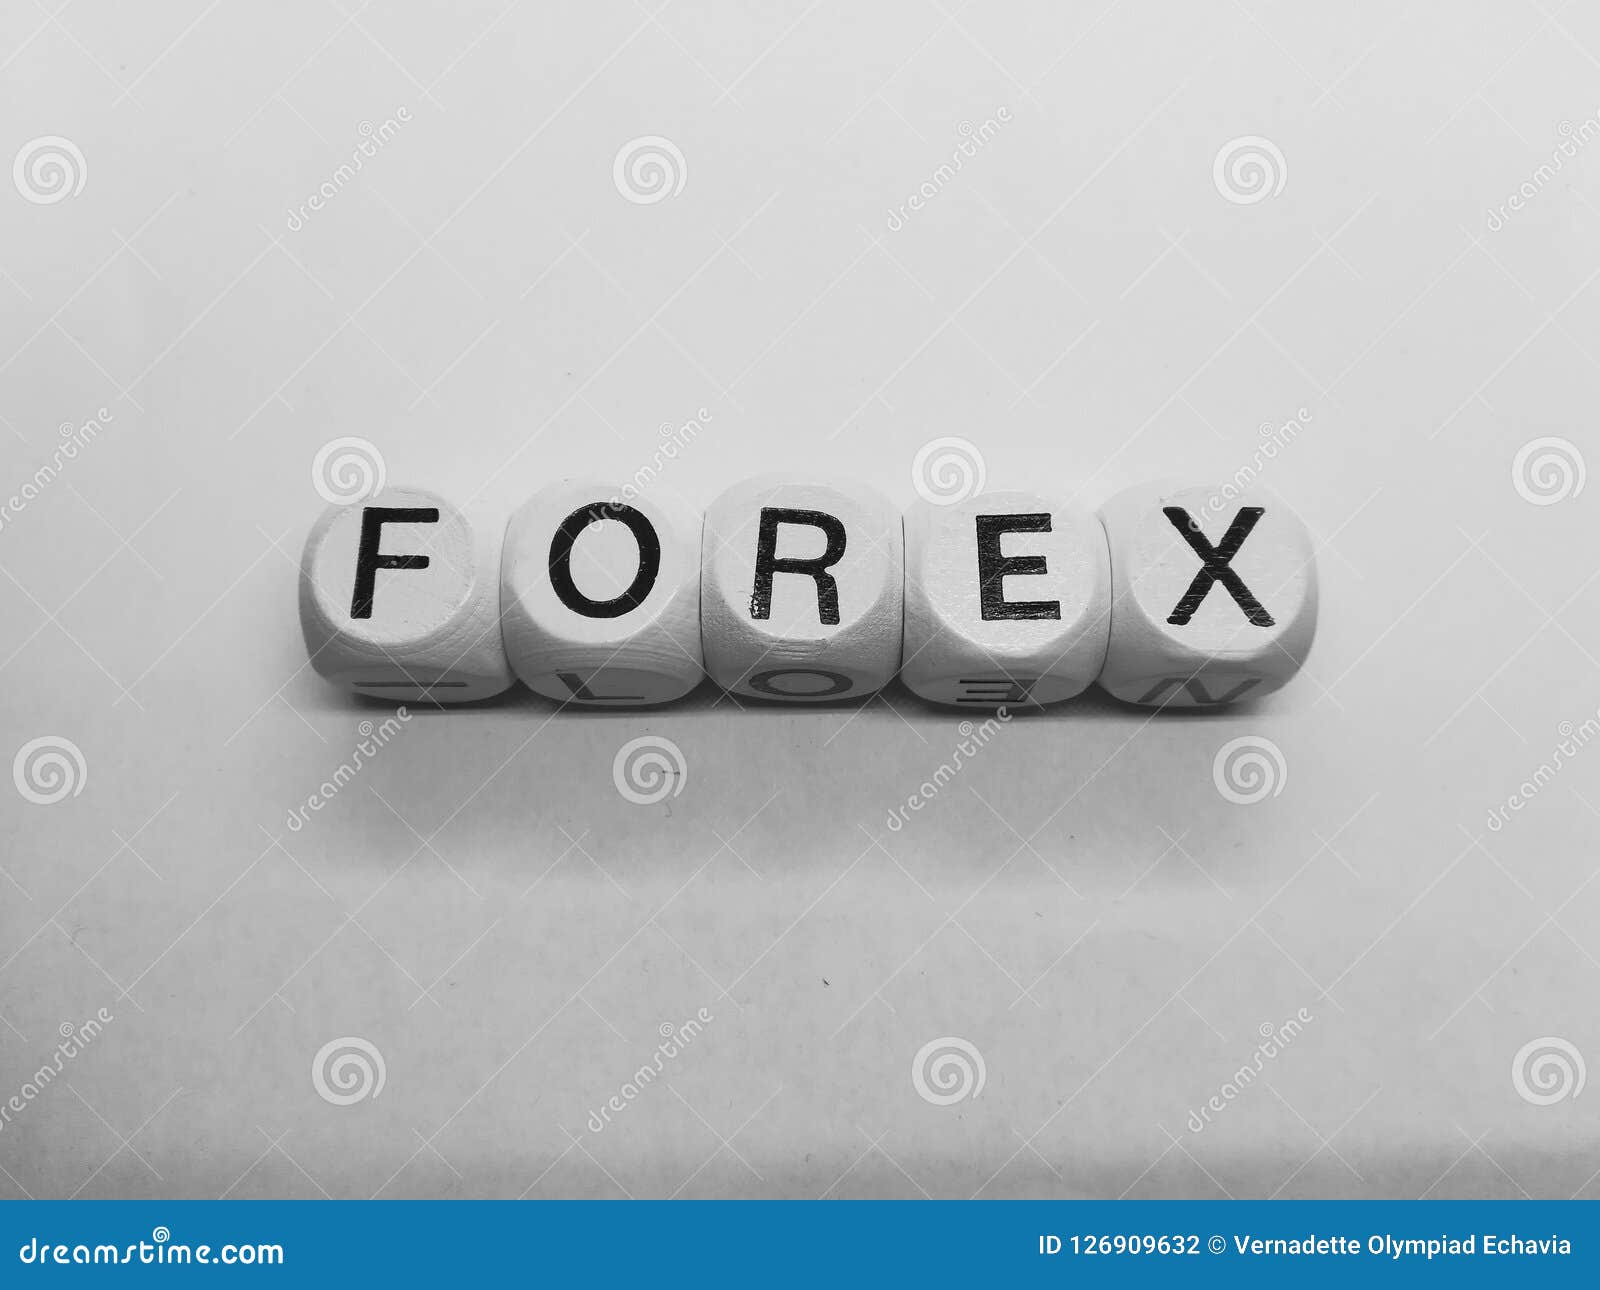 How to spell forex corporation bank forex department of justice